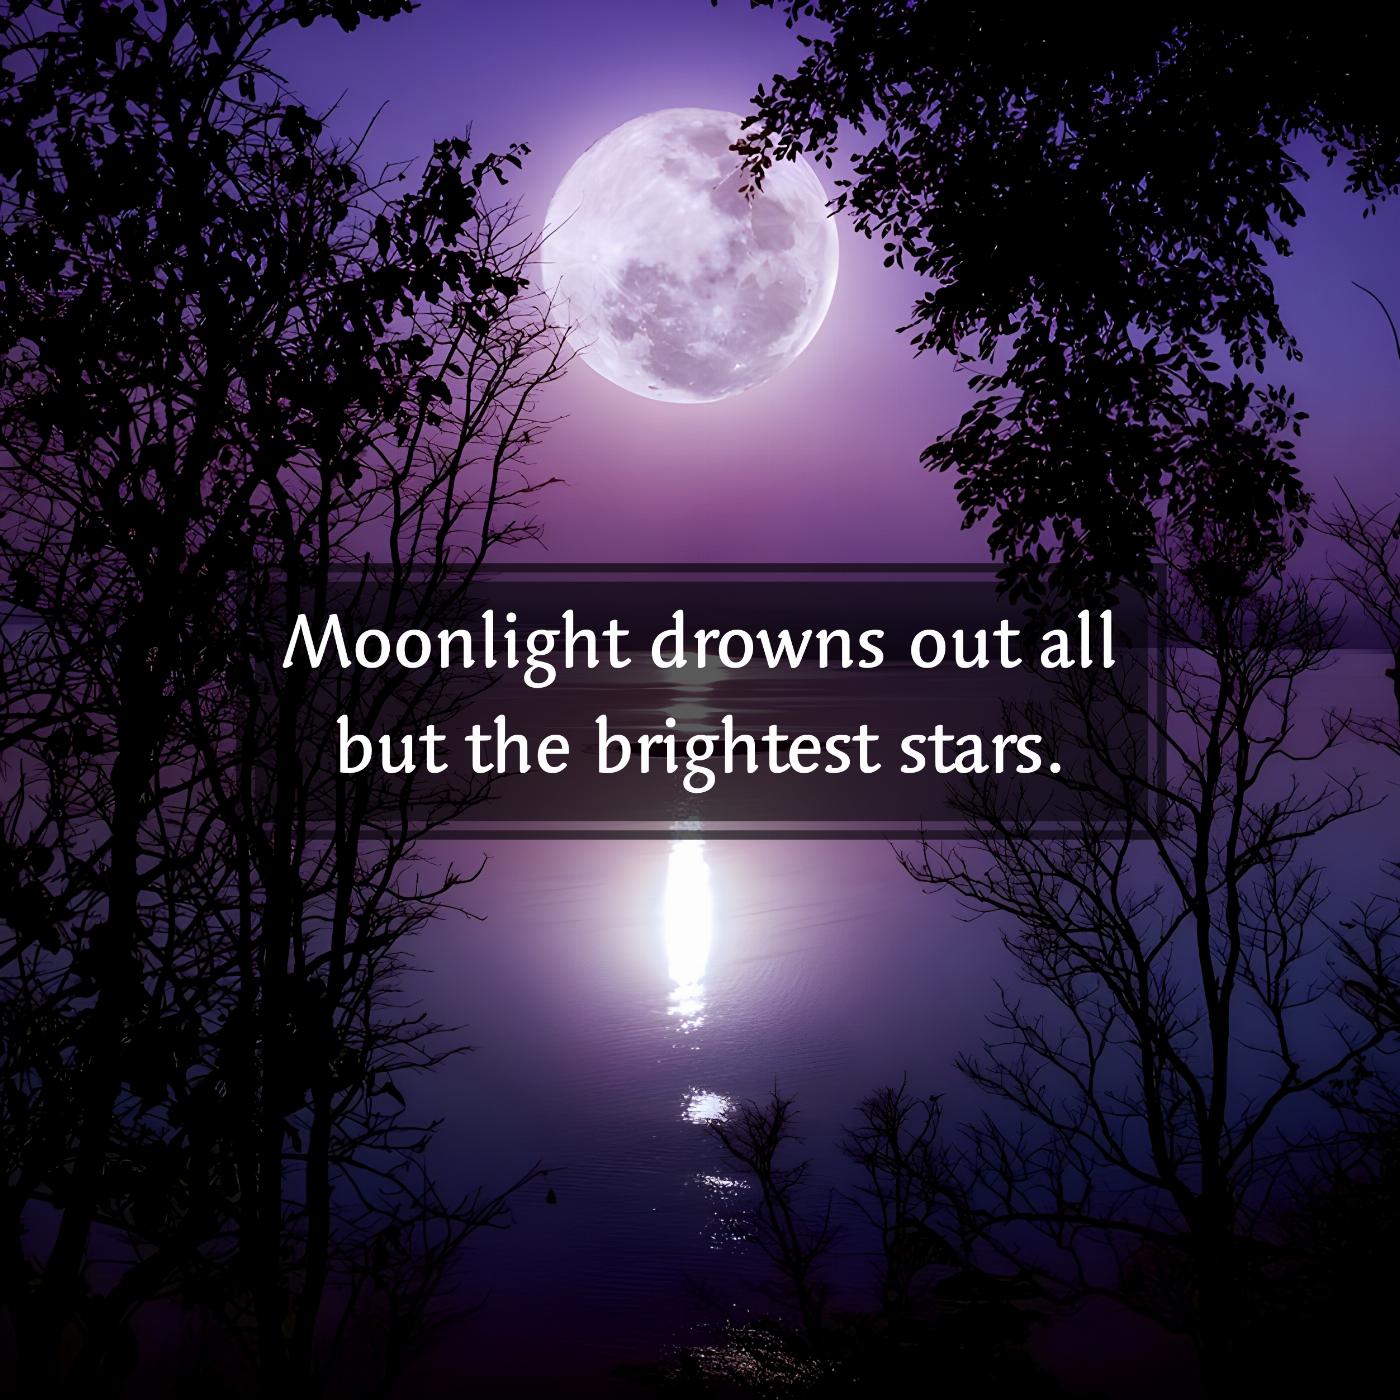 Moonlight drowns out all but the brightest stars